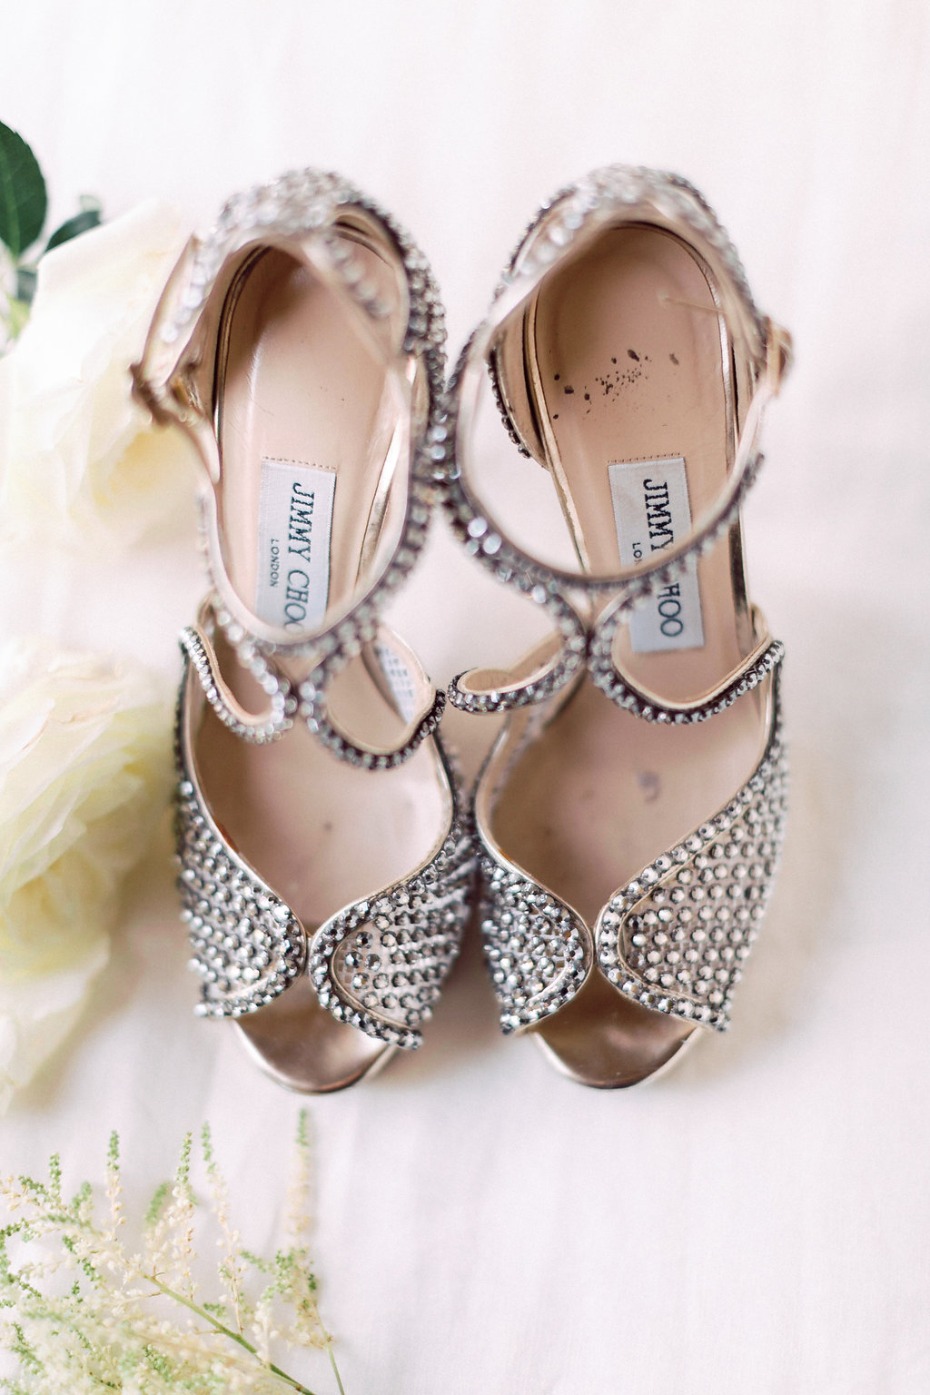 Sparkly Jimmy Choo heels for the bride